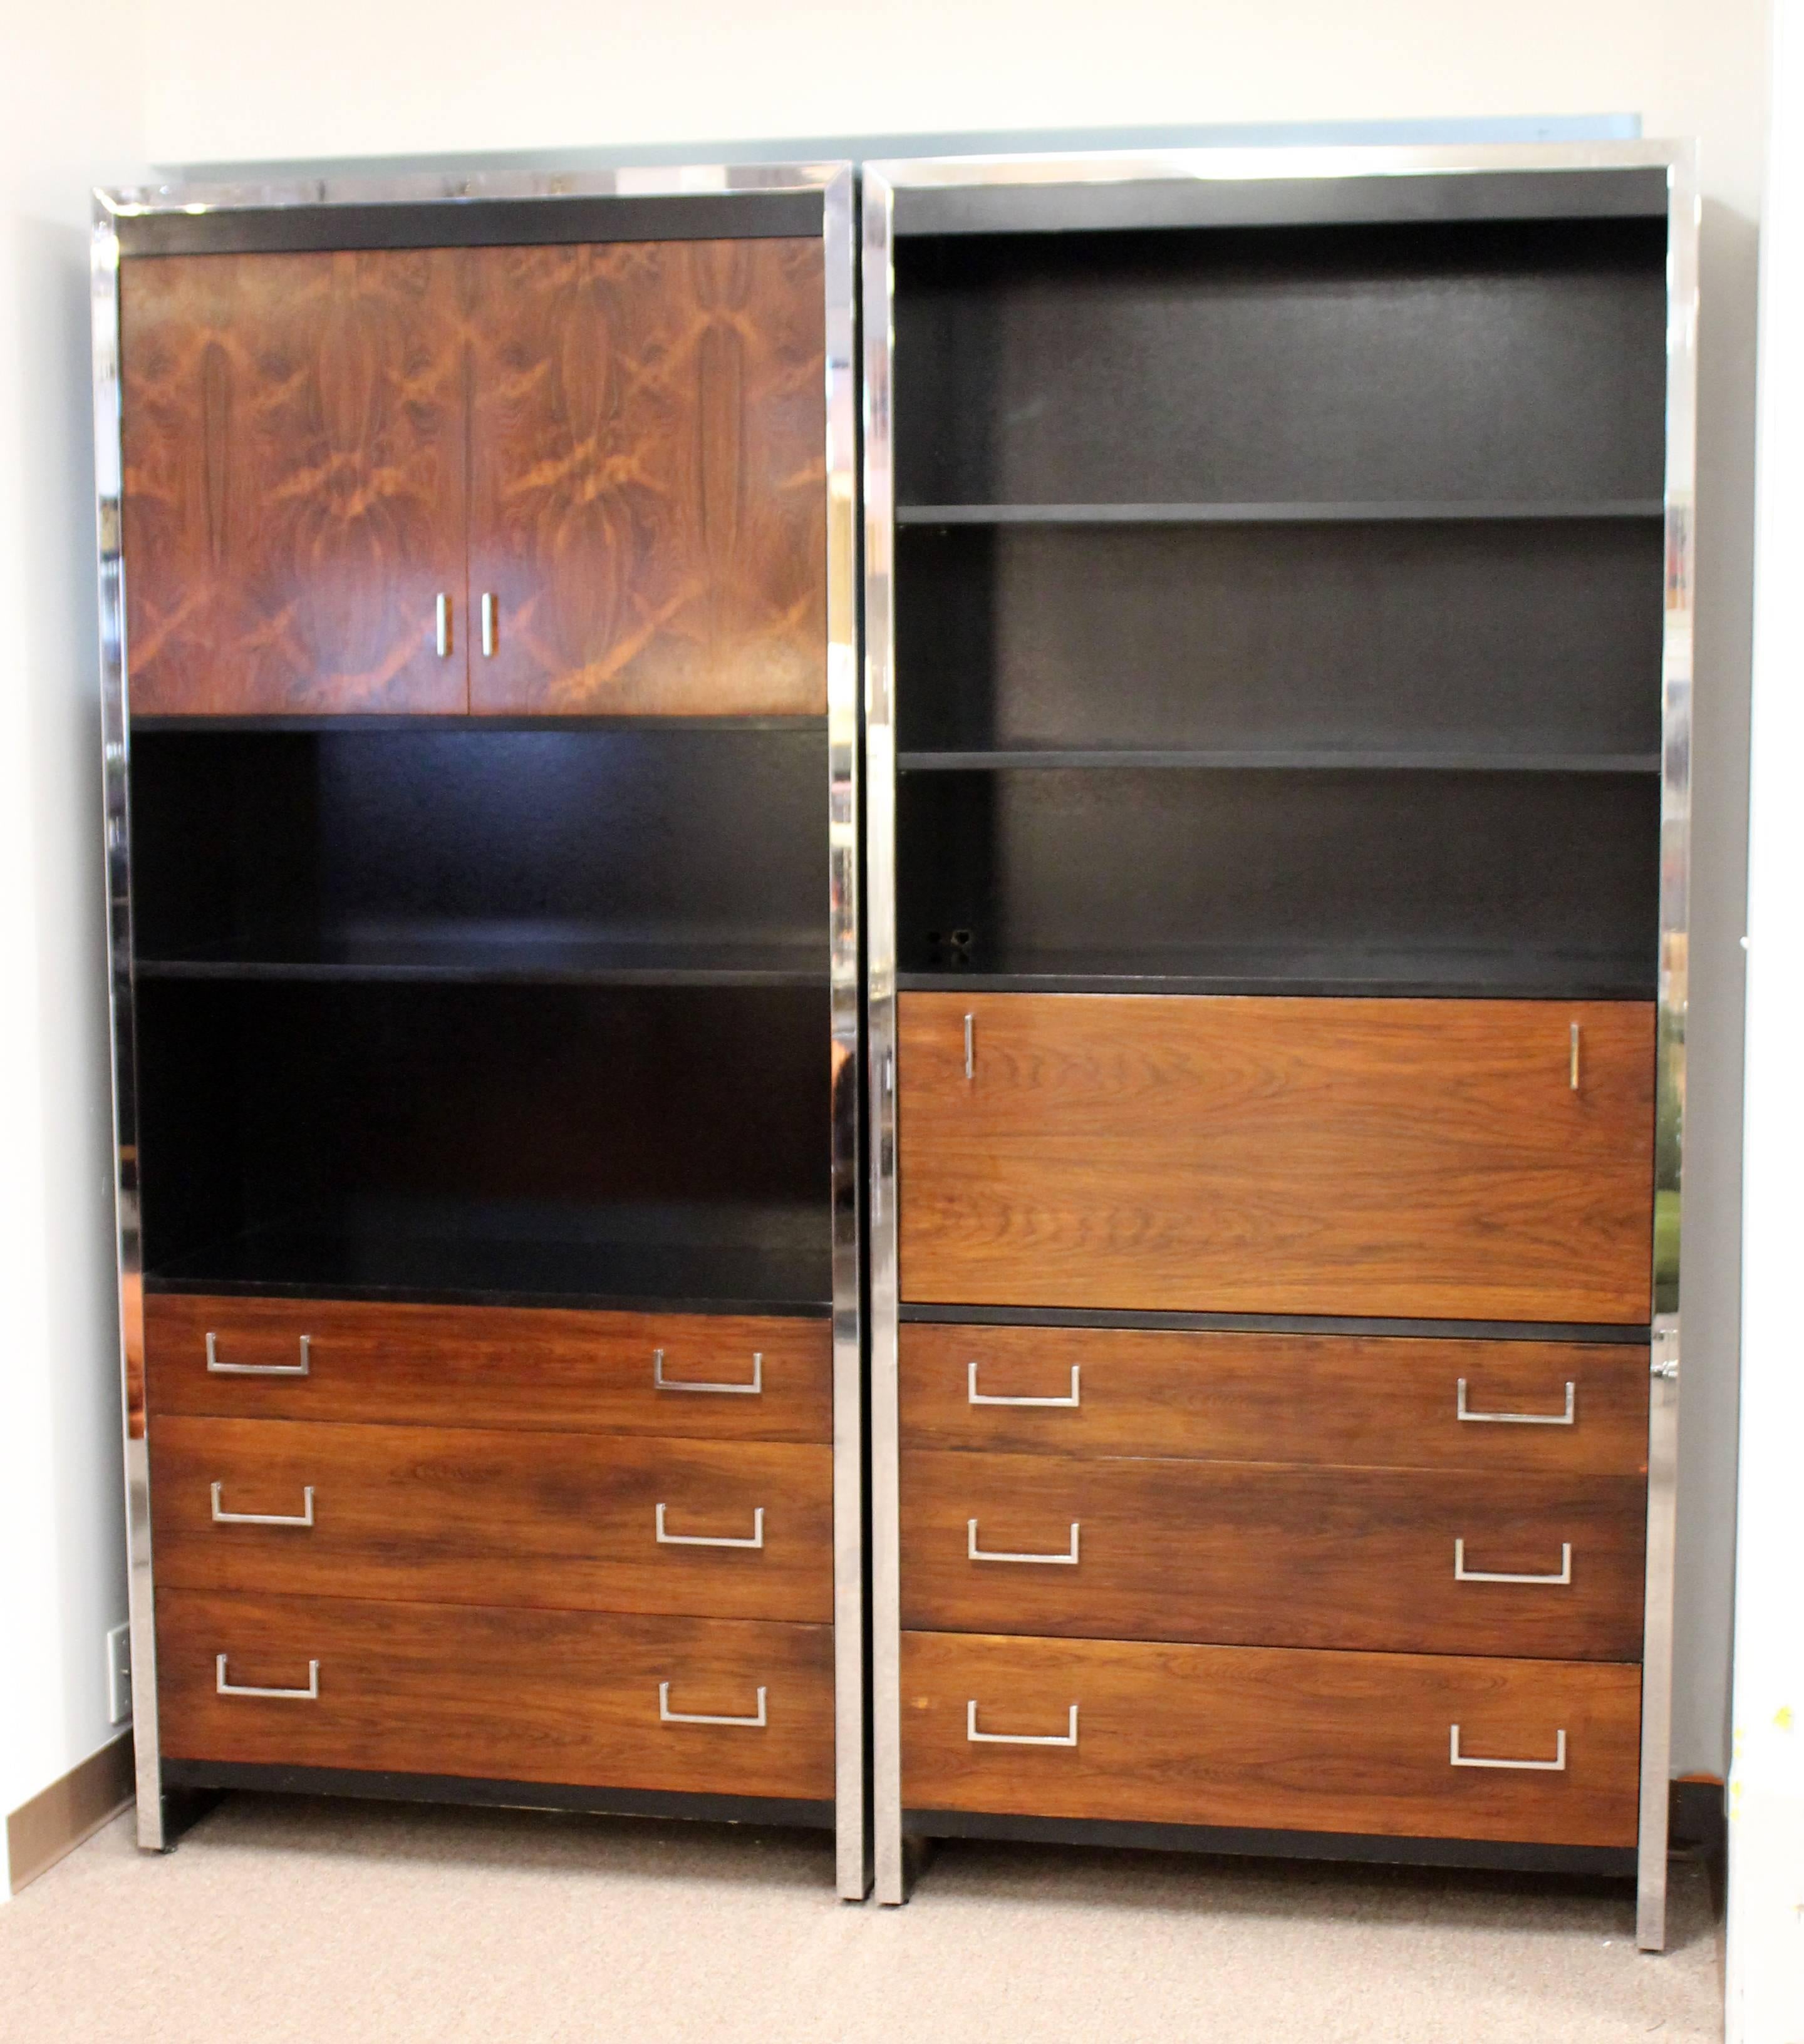 For your consideration is a beautiful pair of rosewood, chrome and black lacquer cabinets, with six drawers, by Milo Baughman for John Stuart Inc, circa 1960s. In excellent condition. The dimensions of each are 38.25